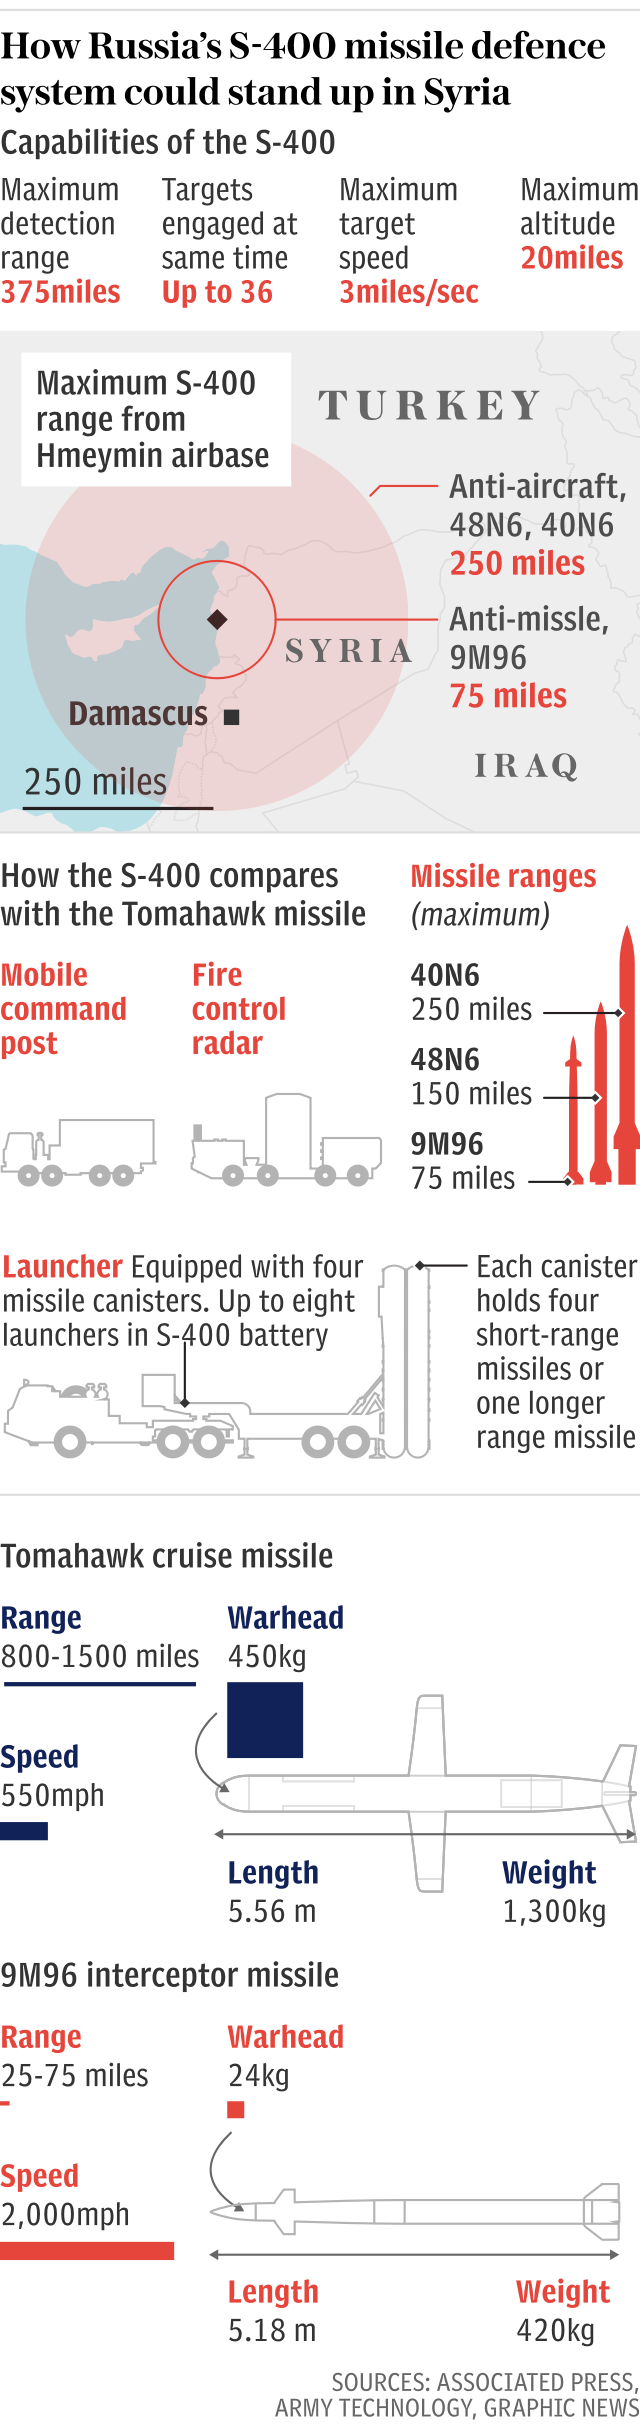 How Russia's S-400 missile defence system could stand up in Syria